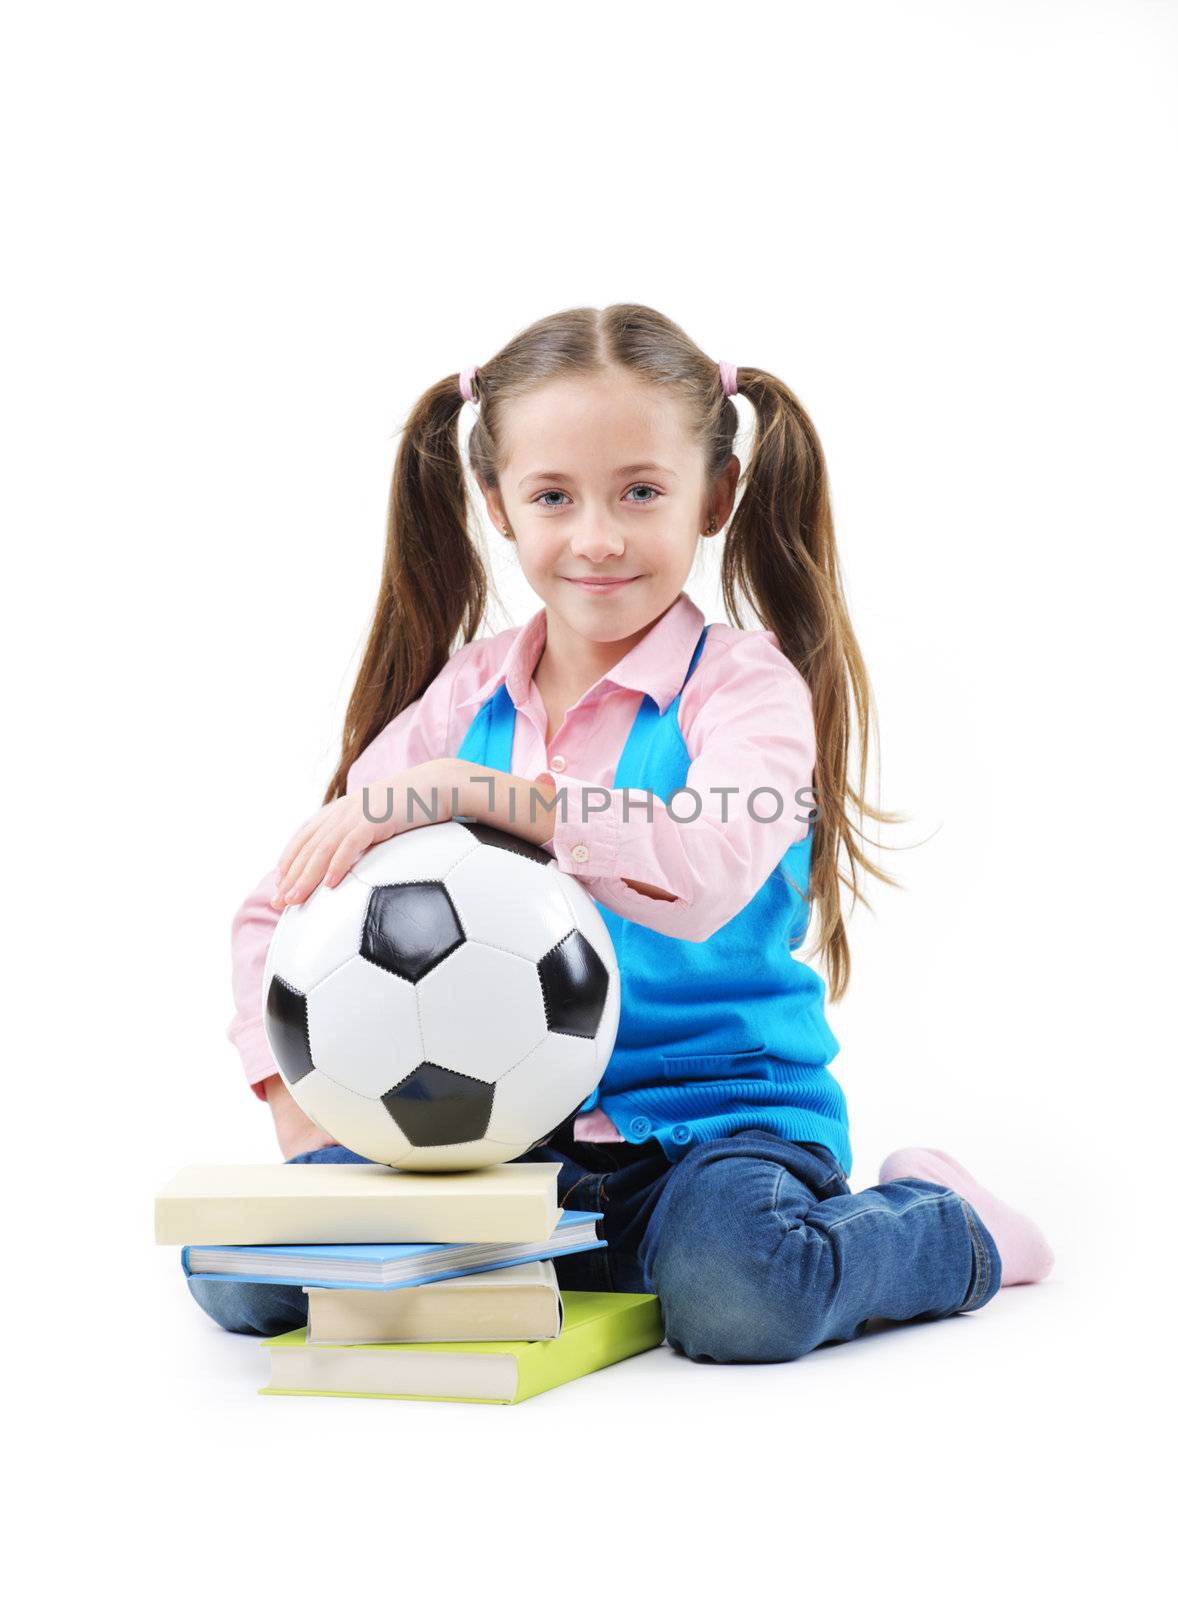 Cute little girl with books and soccer ball on white background